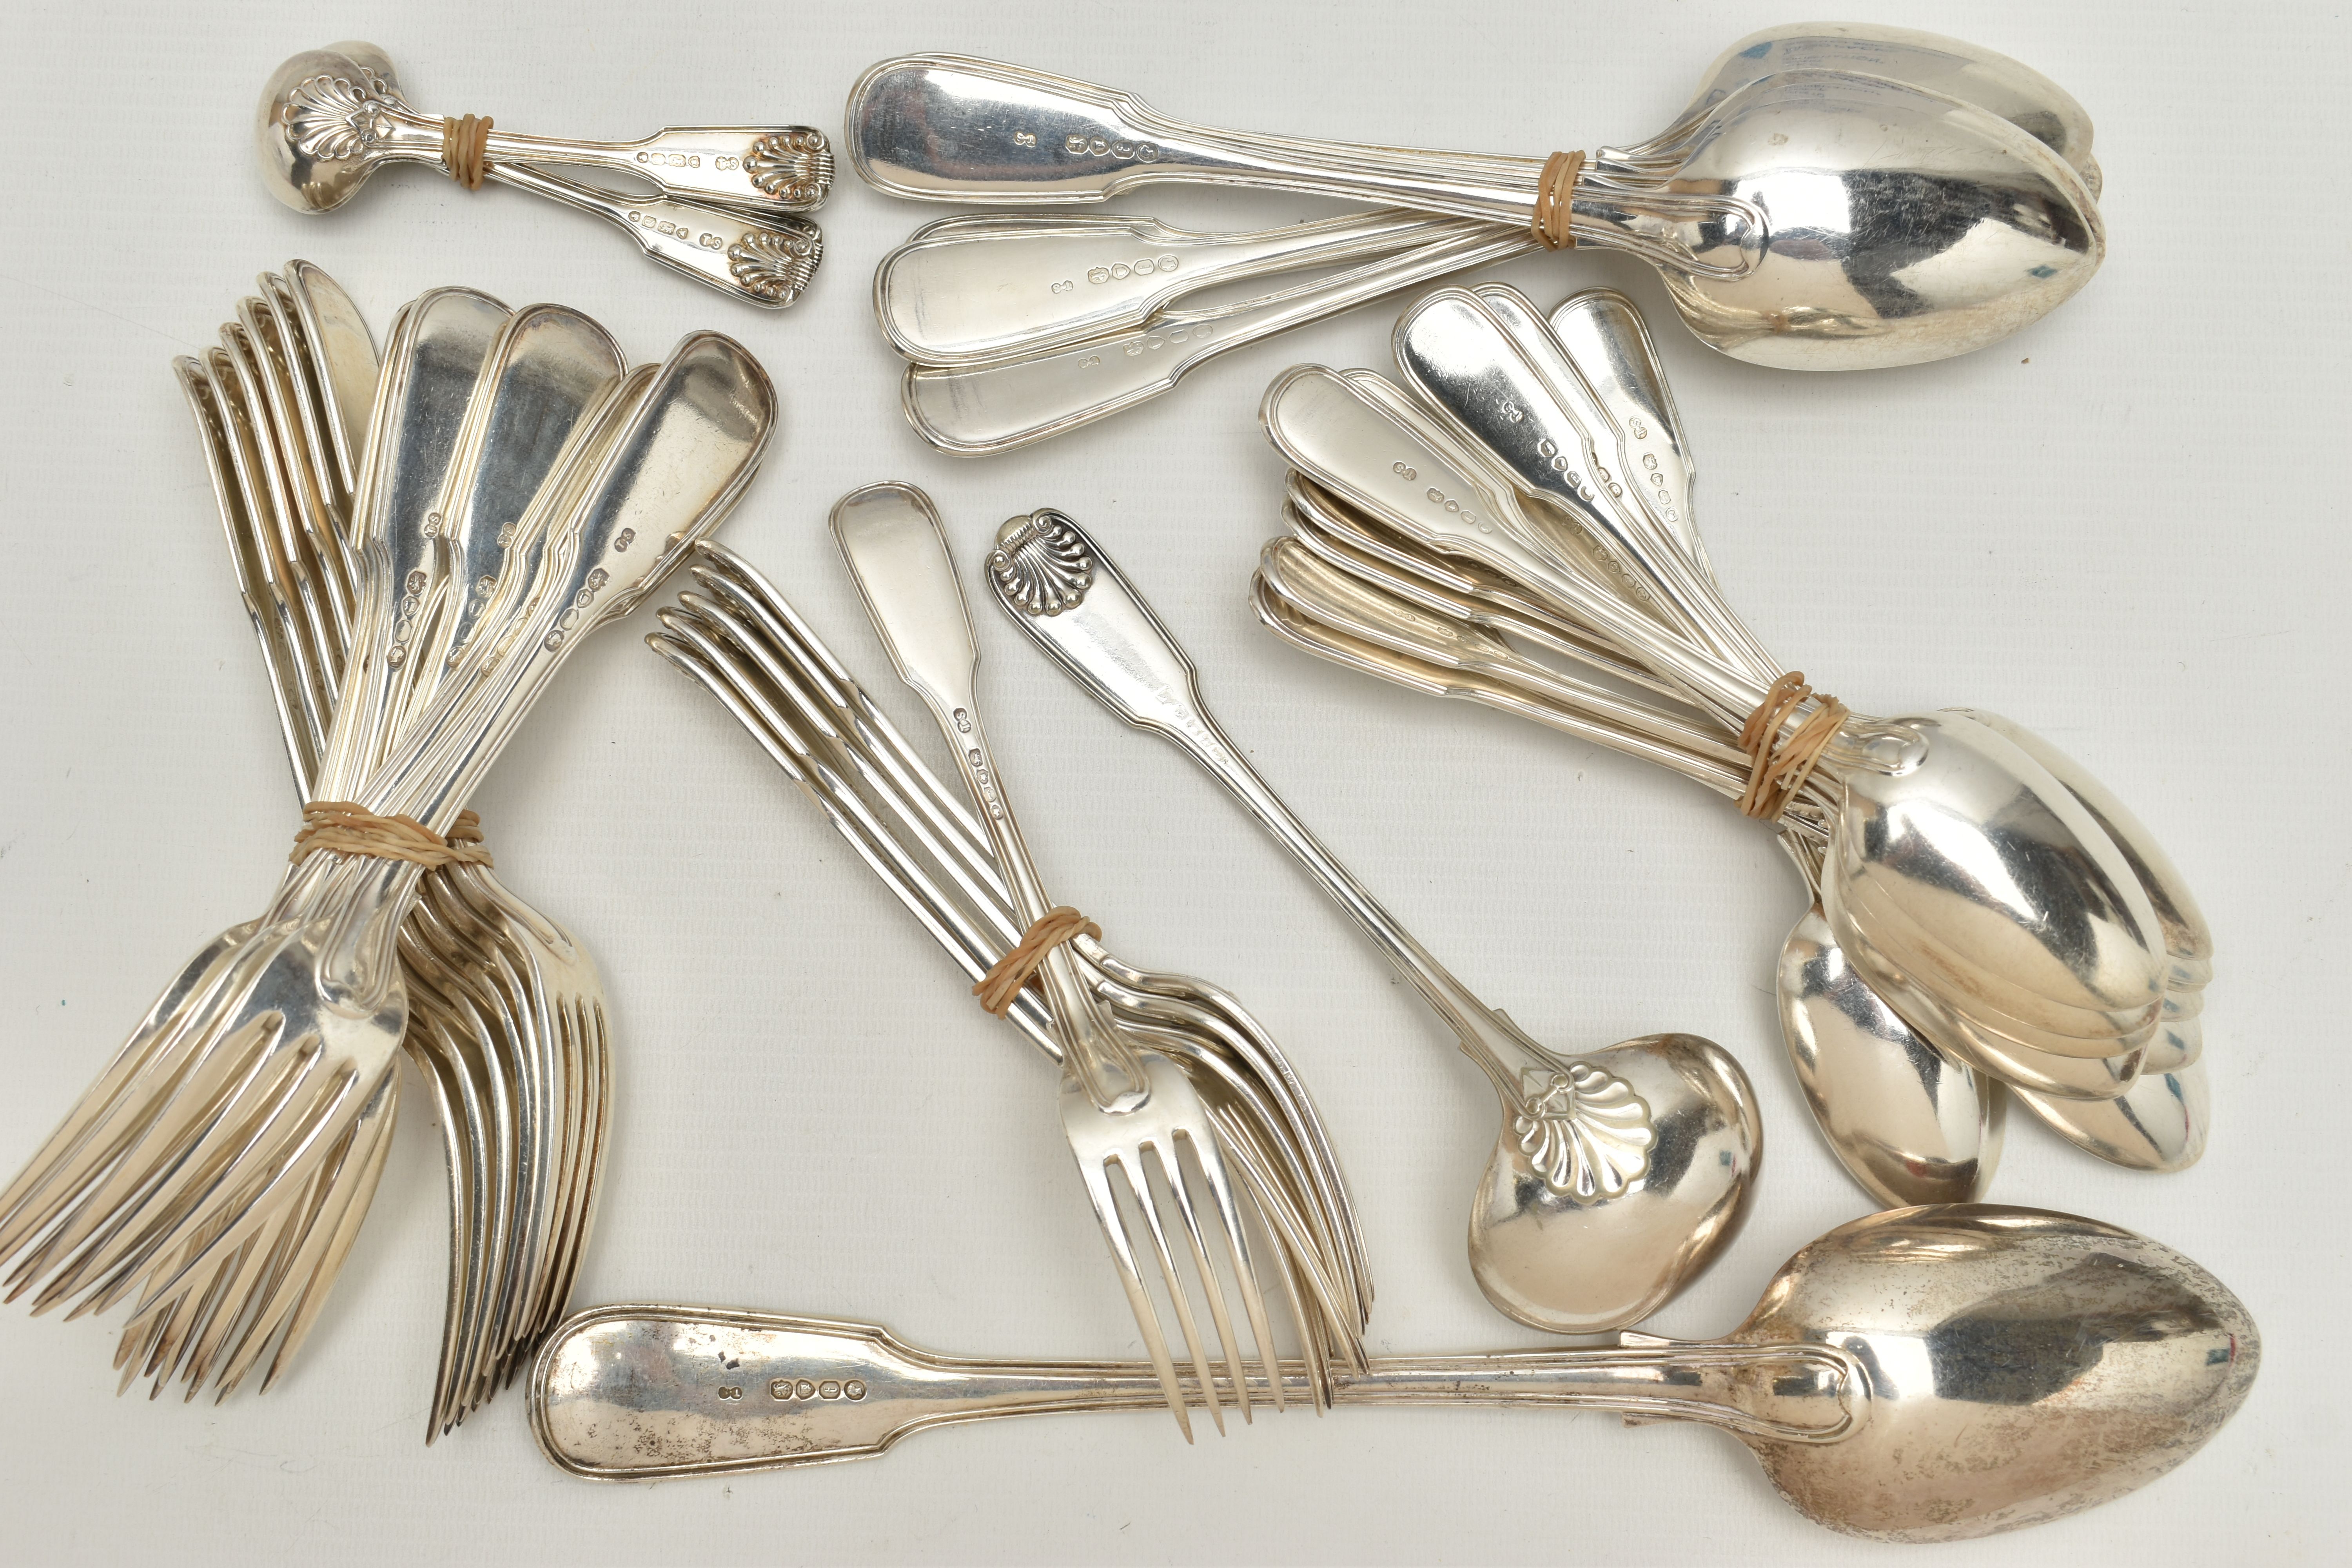 AN ASSORTMENT OF VICTORIA I SILVER CUTLERY, six table spoons, six desert forks, twelve desert - Image 4 of 8